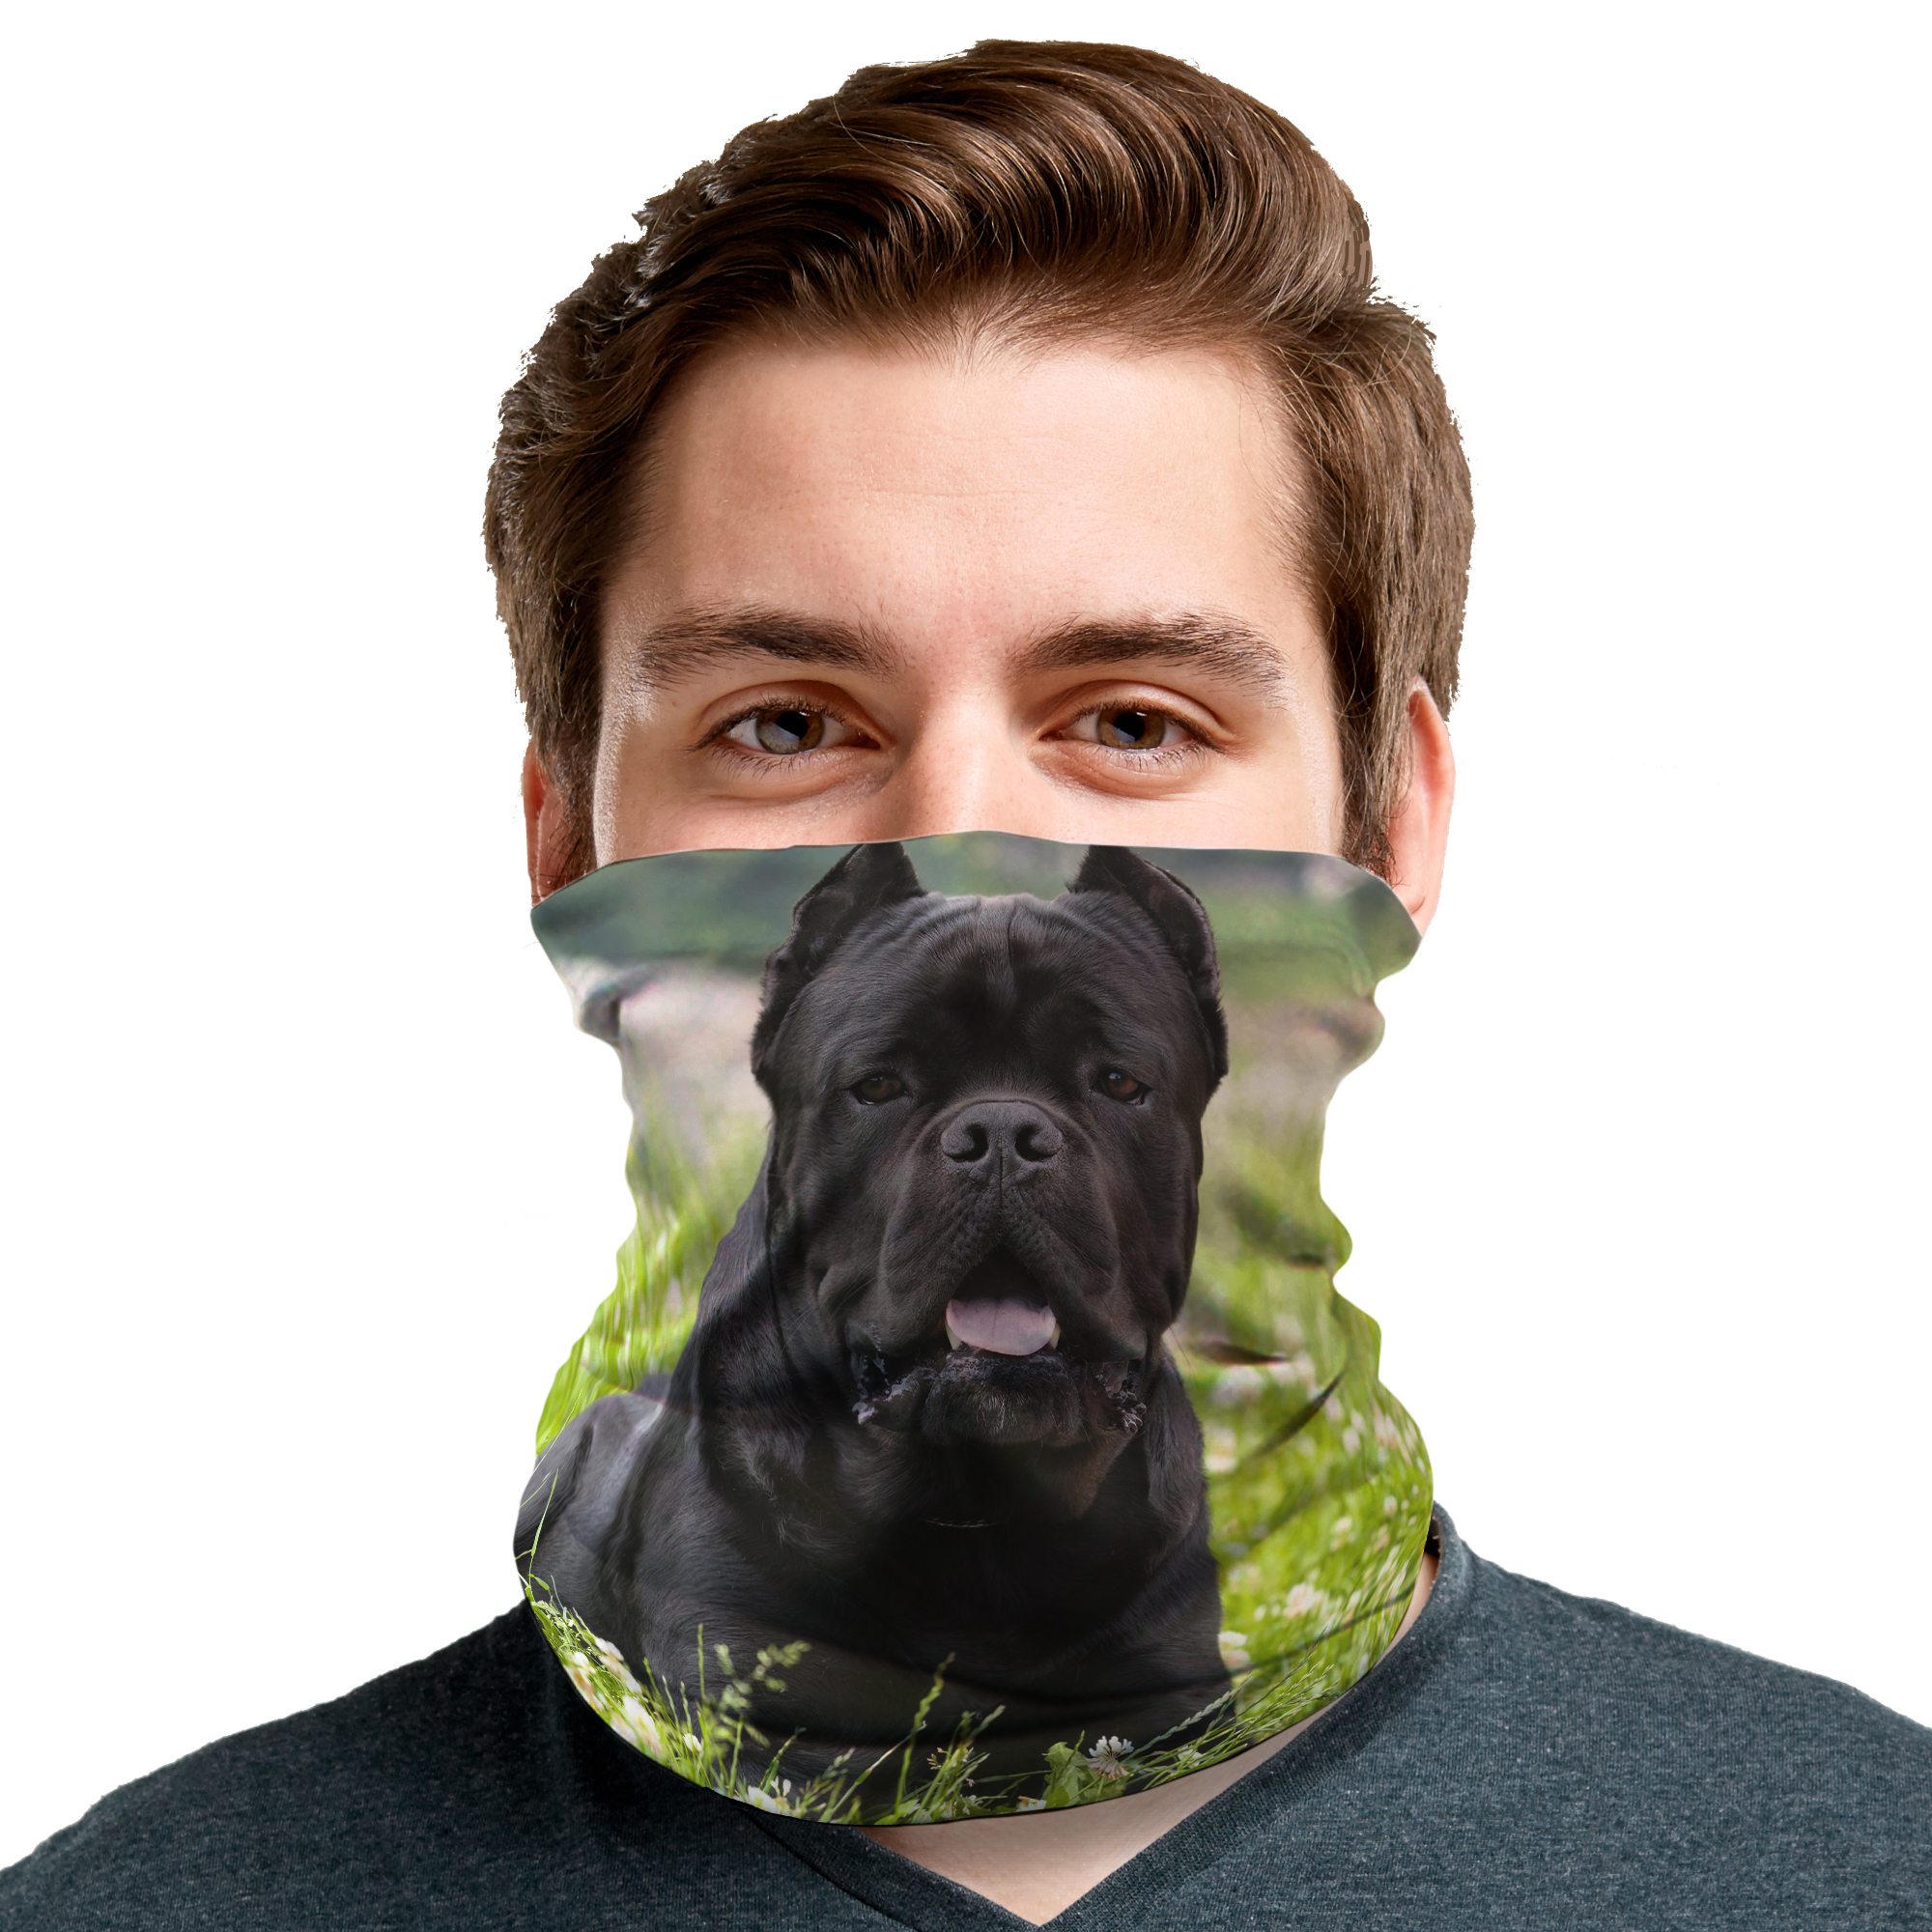 Protect yourself in style! ONE PRISMER custom design from photo Neck gaiter